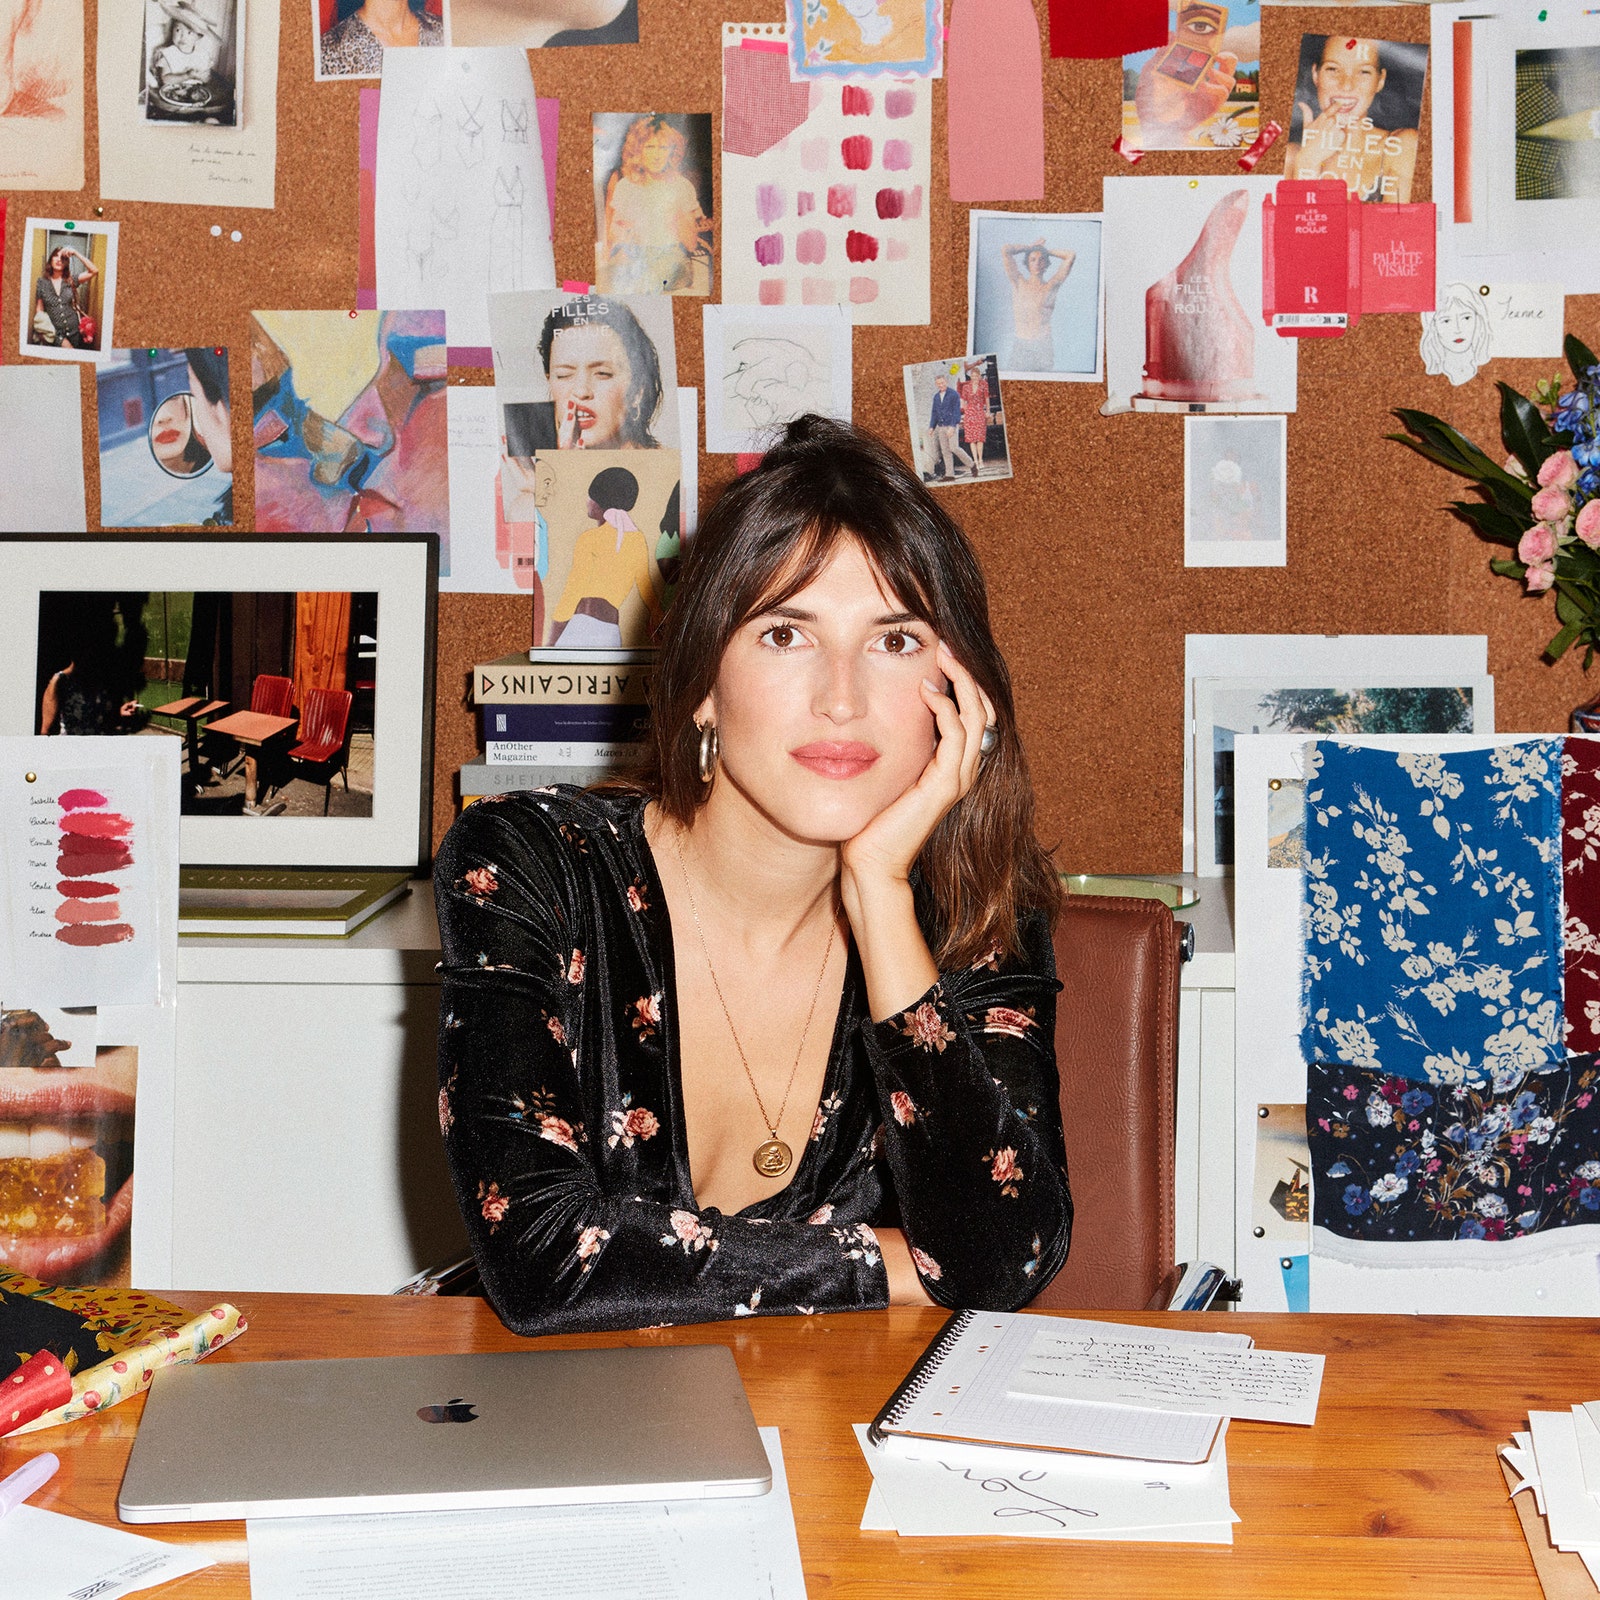 What to Wear in Paris, According to French Fashion Designer Jeanne Damas